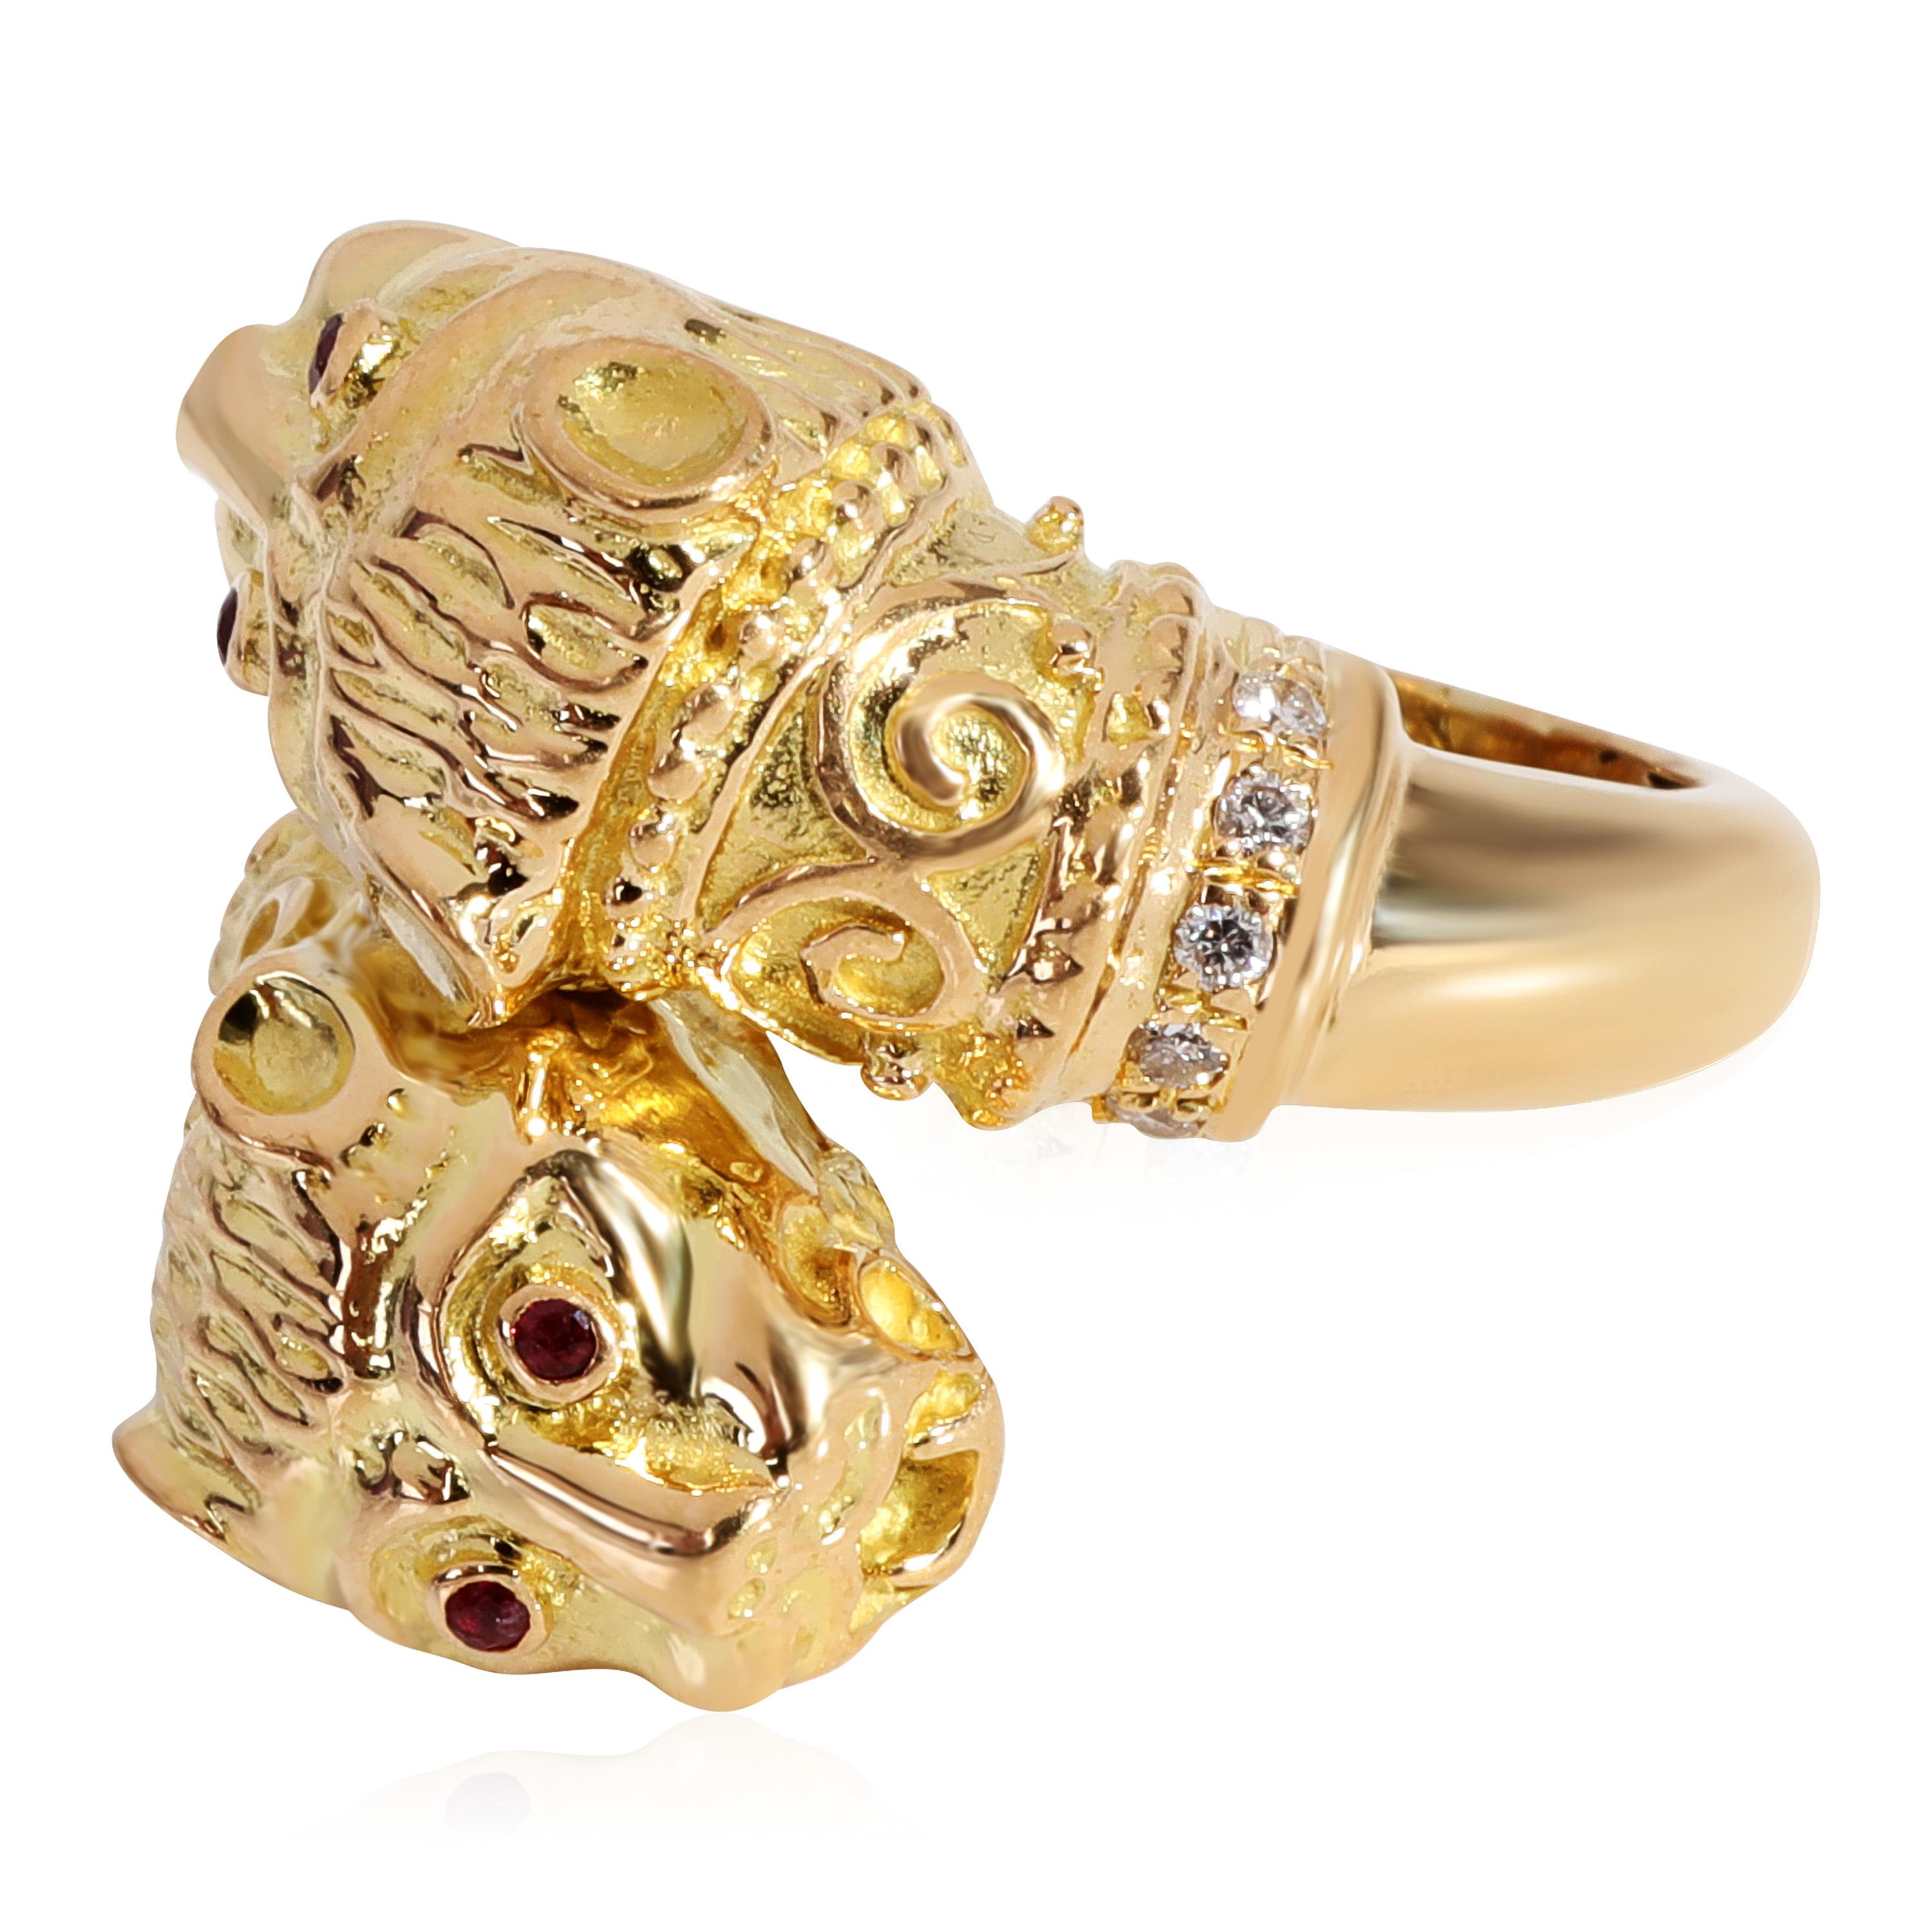 Ilias Lalaounis Ruby Diamond Ring in 18k Yellow Gold 0.08 CTW

PRIMARY DETAILS
SKU: 117689
Listing Title: Ilias Lalaounis Ruby Diamond Ring in 18k Yellow Gold 0.08 CTW
Condition Description: Retails for 8000 USD. In excellent condition and recently